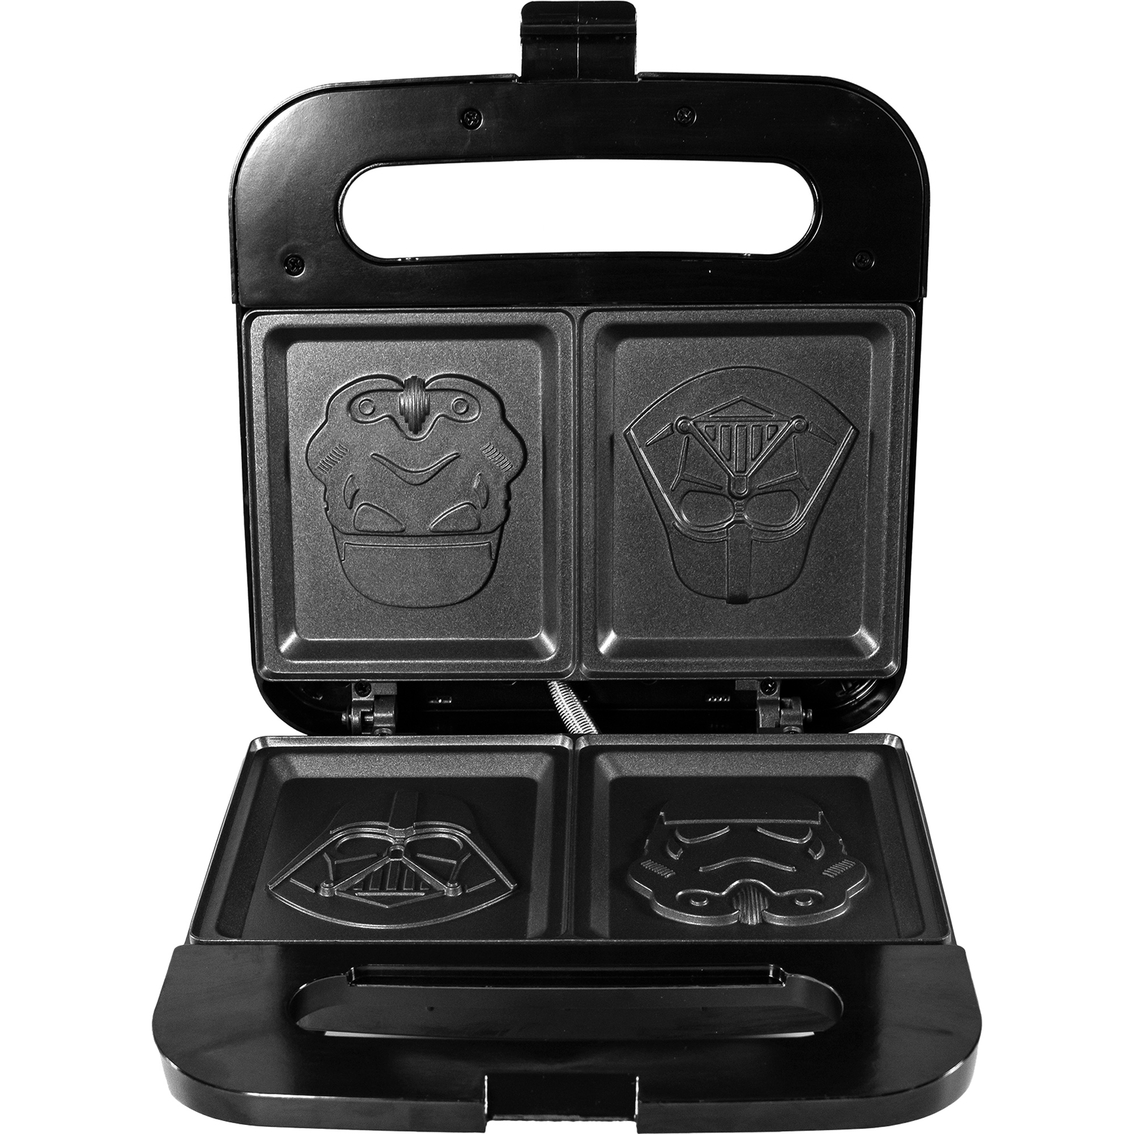 Star Wars Grilled Cheese Maker - Image 3 of 6